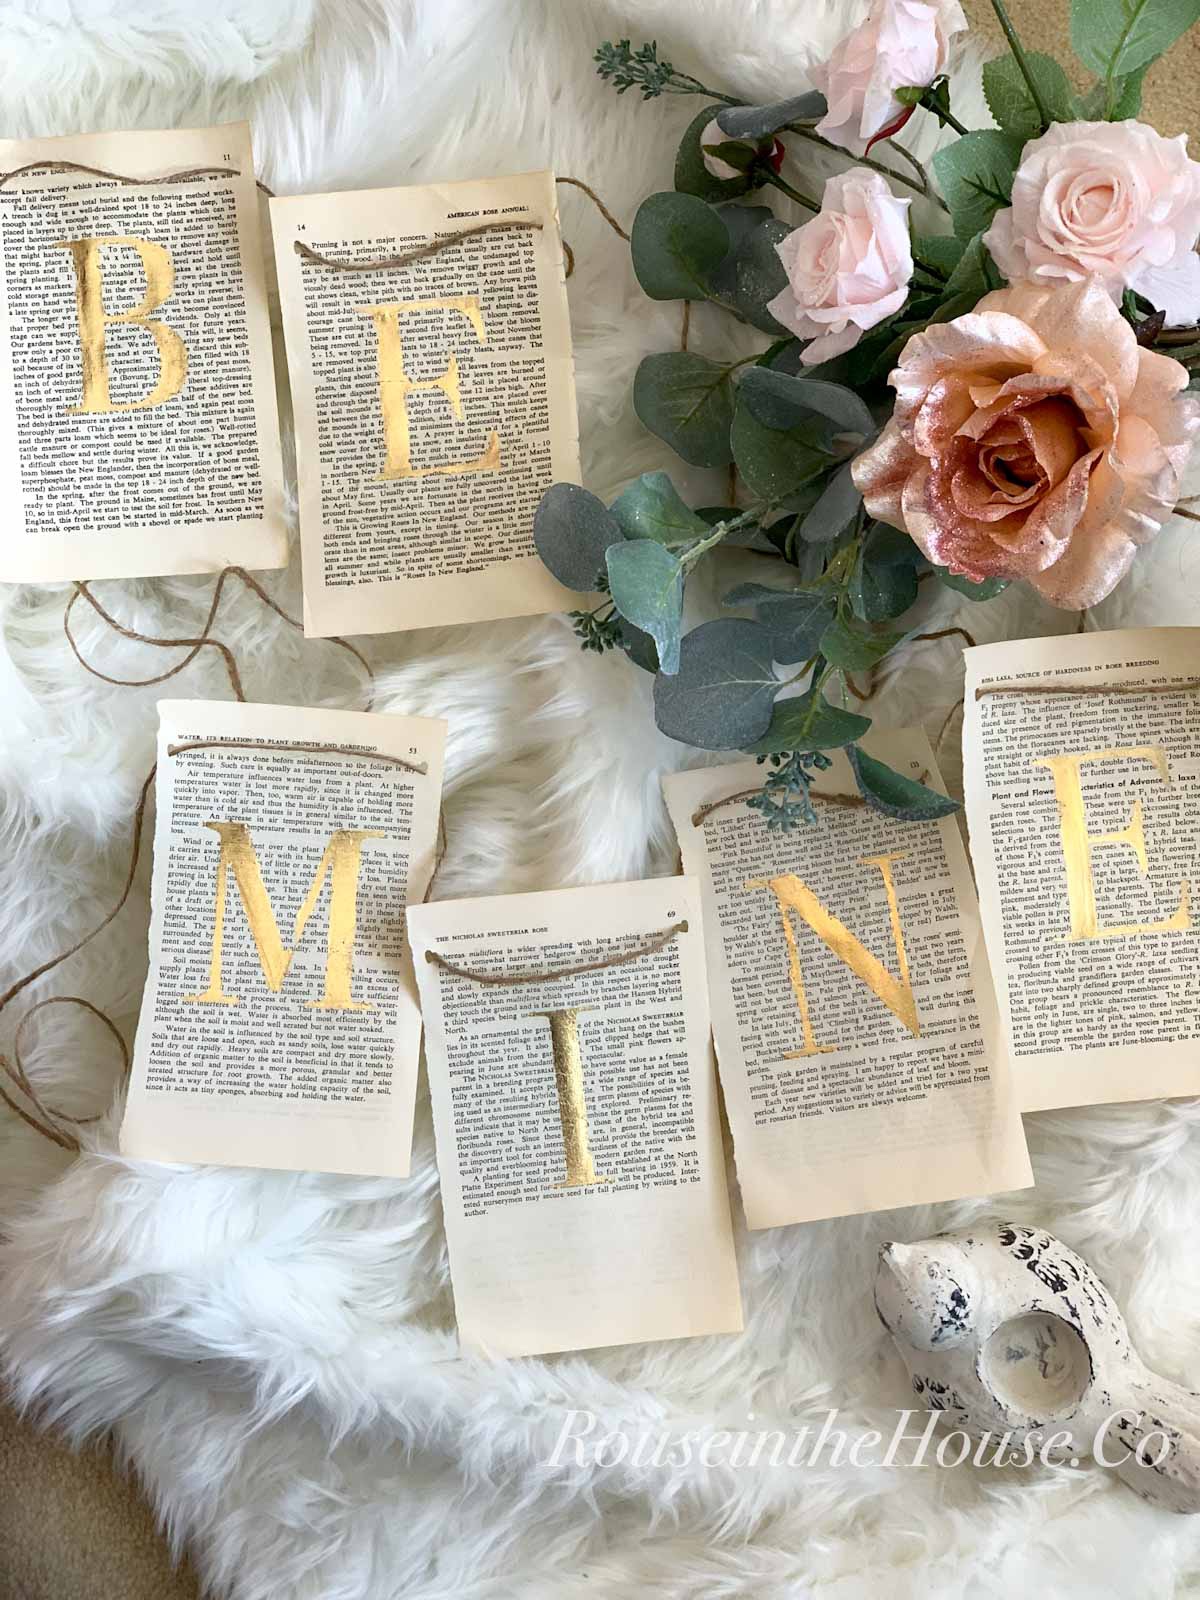 Torn pages lay on the floor with gold gilded letters, spelling "Be Mine".